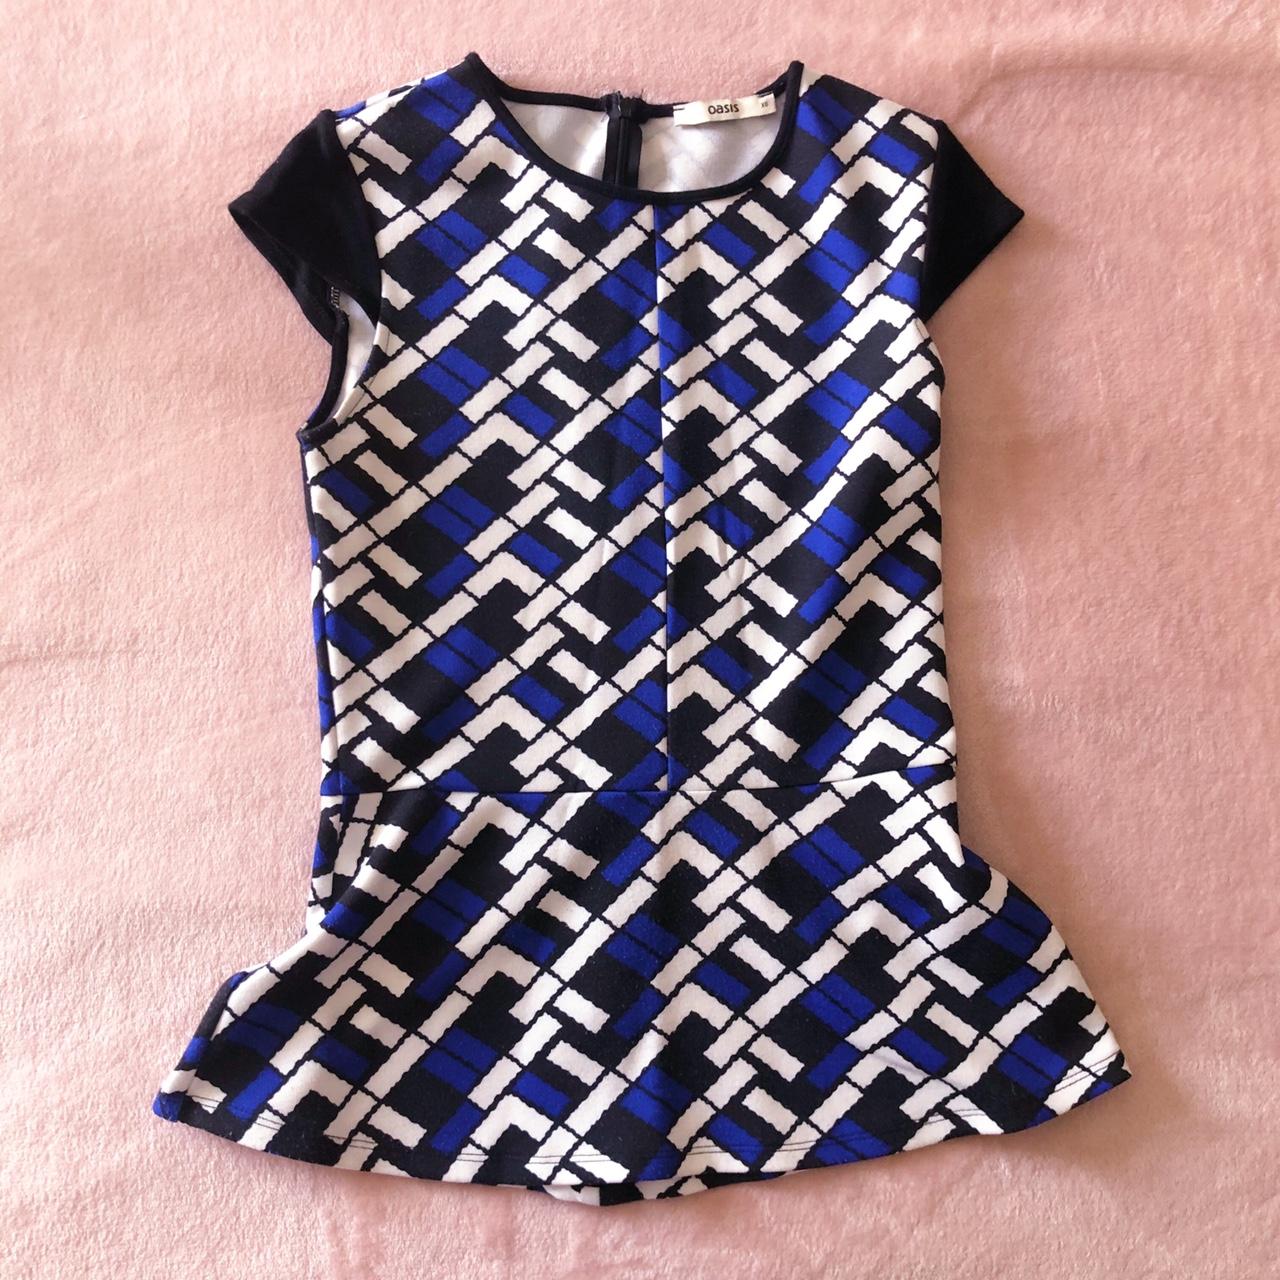 Oasis Women's Blue and Black Blouse